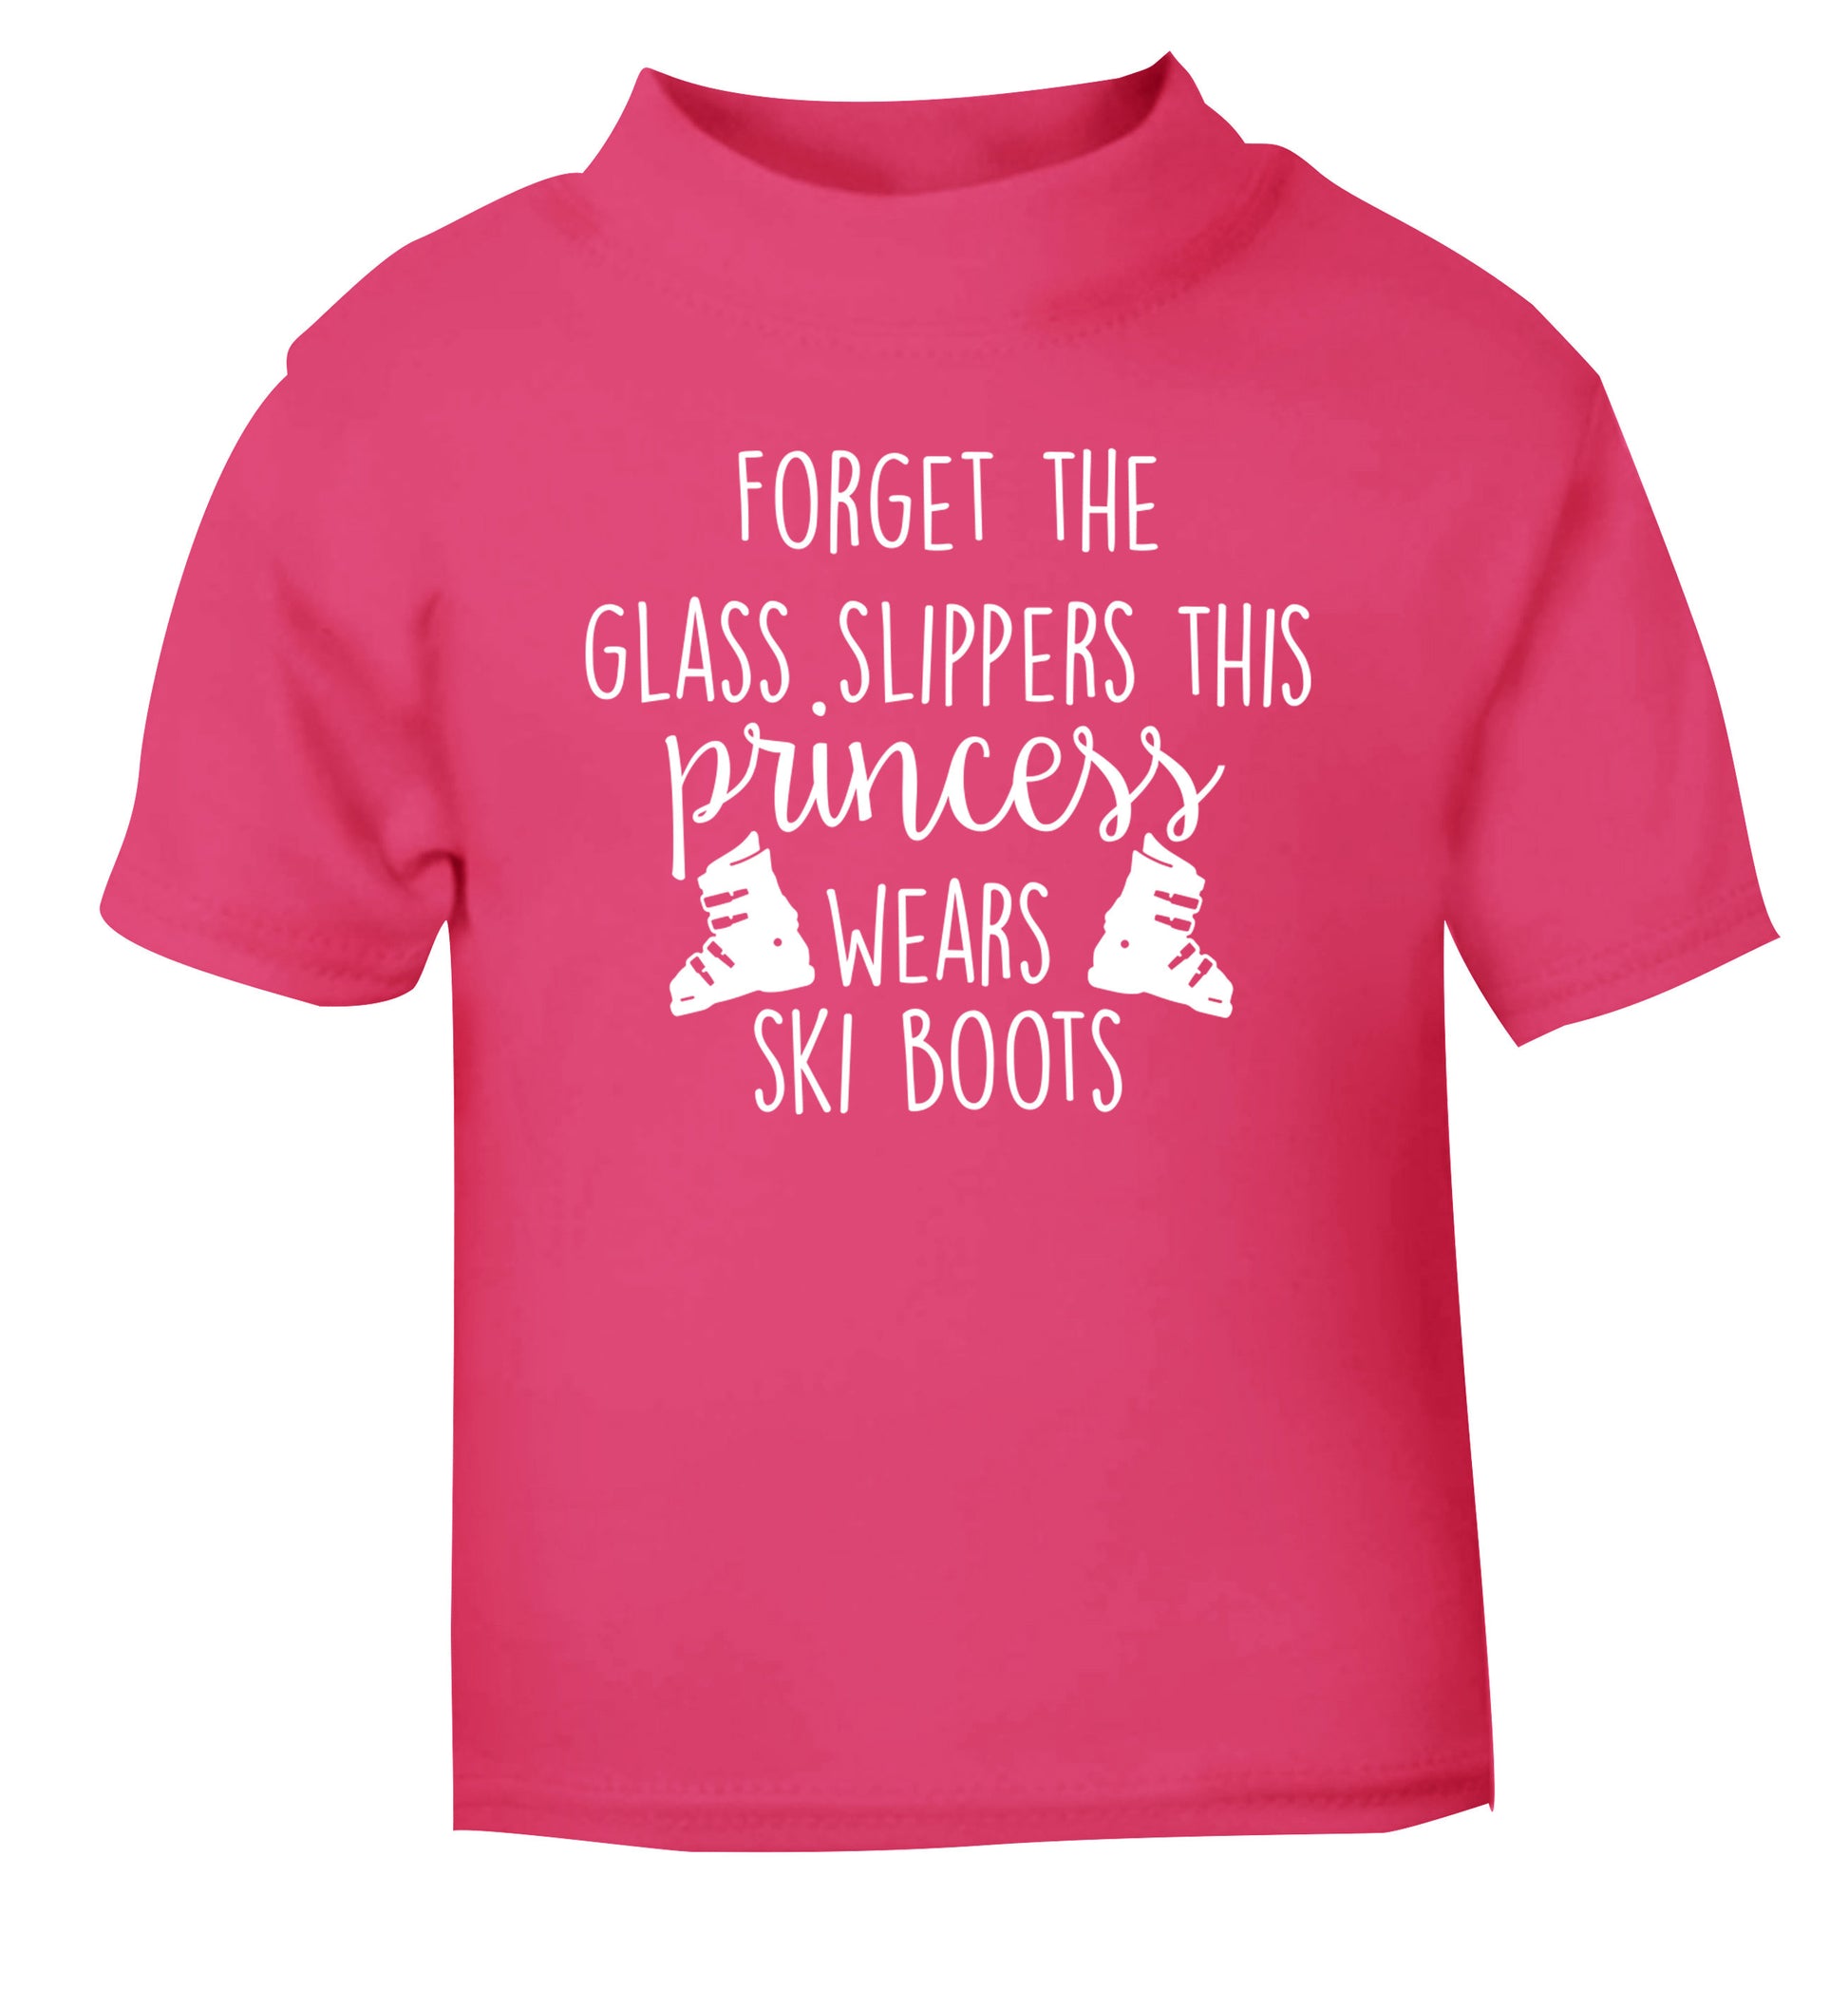 Forget the glass slippers this princess wears ski boots pink Baby Toddler Tshirt 2 Years